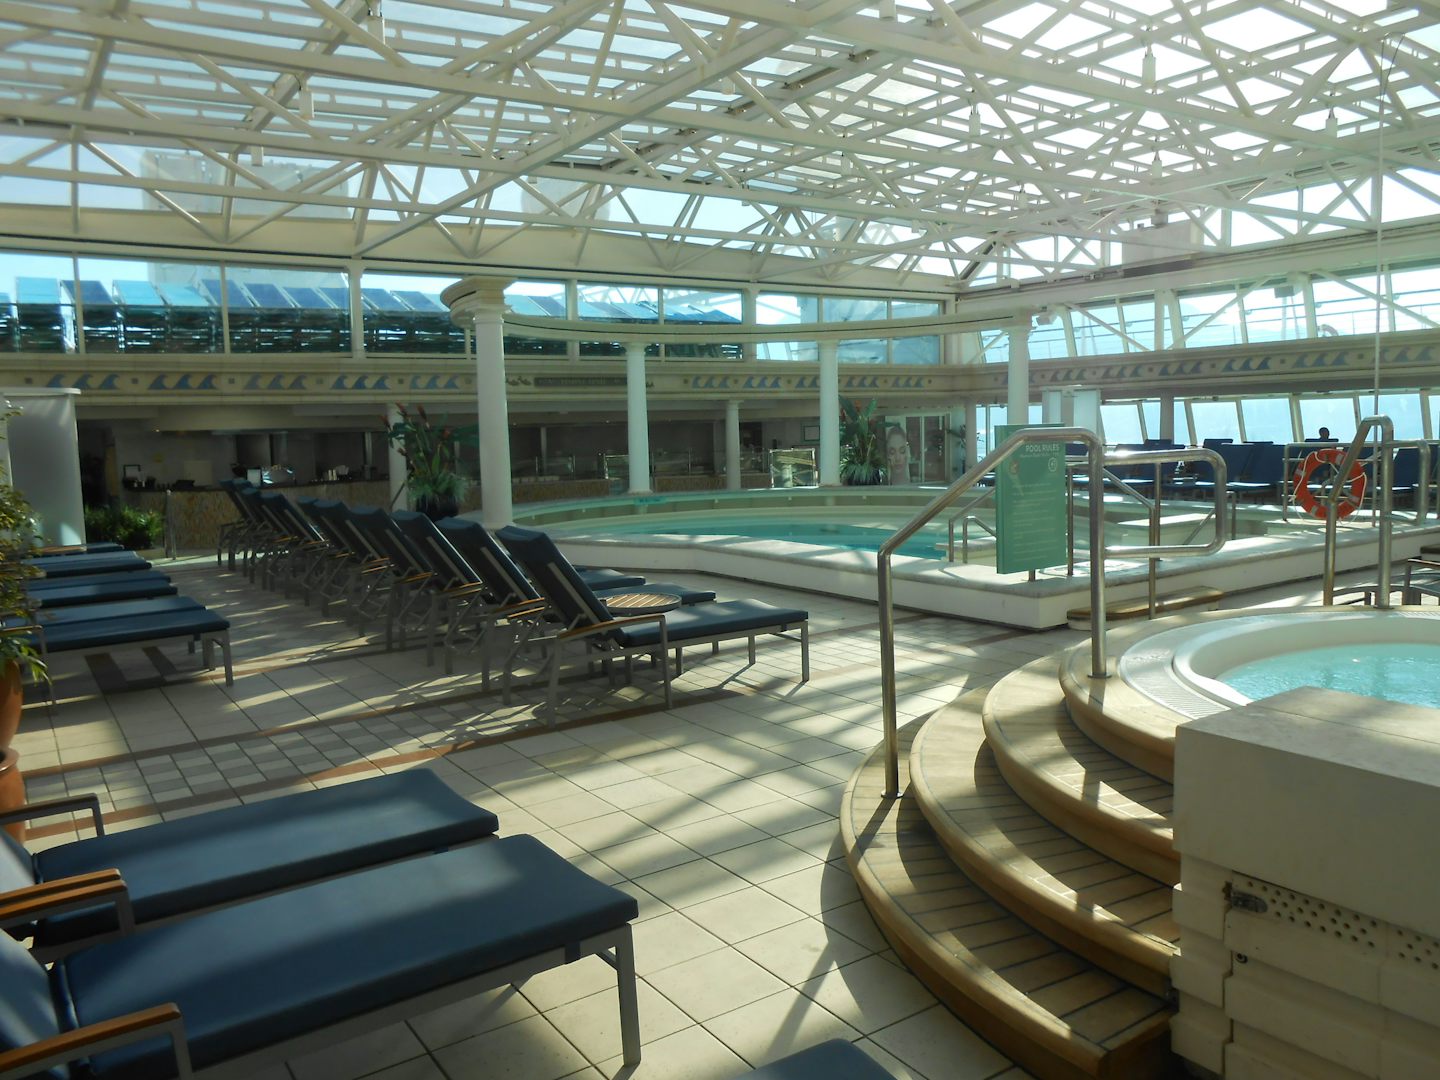 The Glass House indoor pool and restaurant